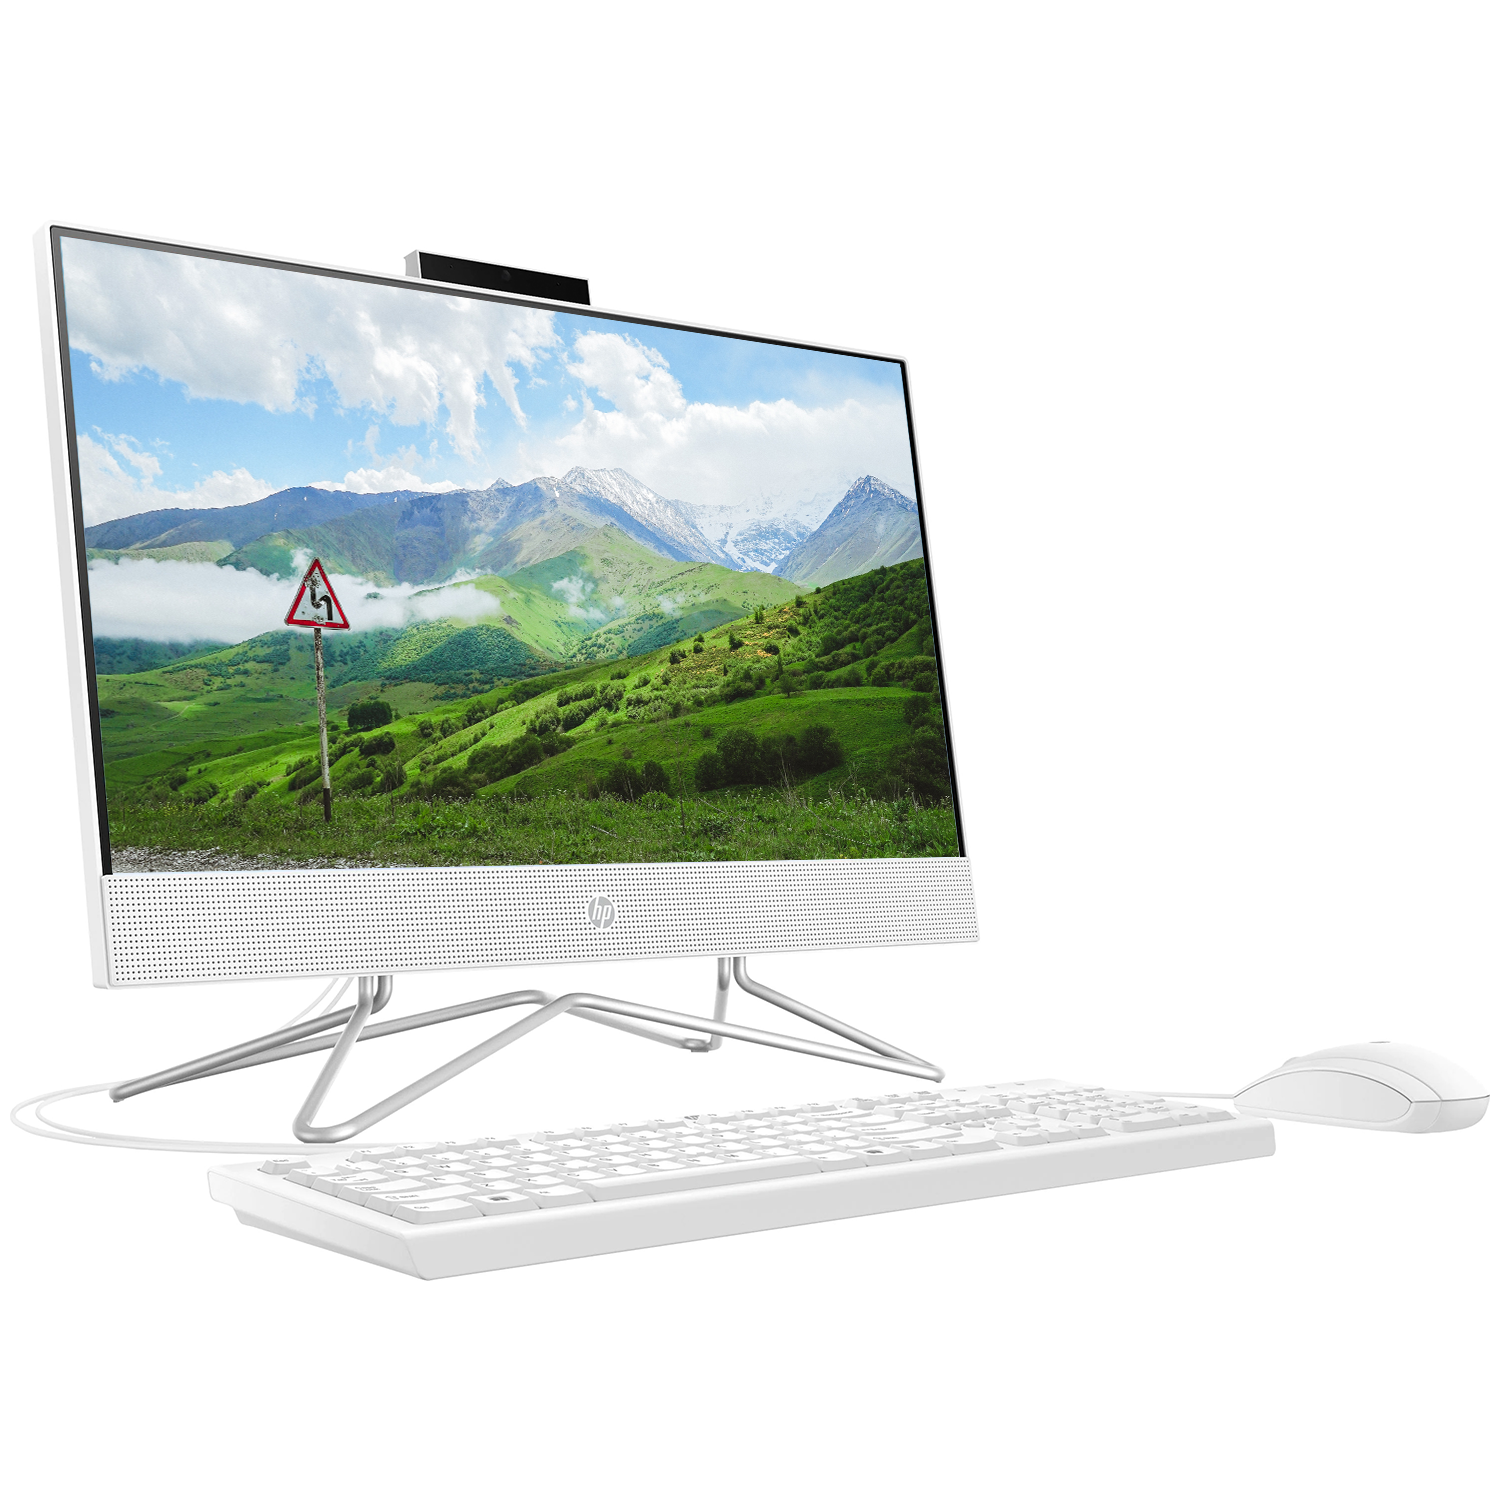 HP All-in-One Desktop, 21.5" FHD Screen, Intel Celeron J4025, 32GB RAM, 1TB SSD, Webcam, HDMI, Media Card Reader, Wi-Fi, Wired KB & Mouse, Windows 11 Home - image 4 of 5